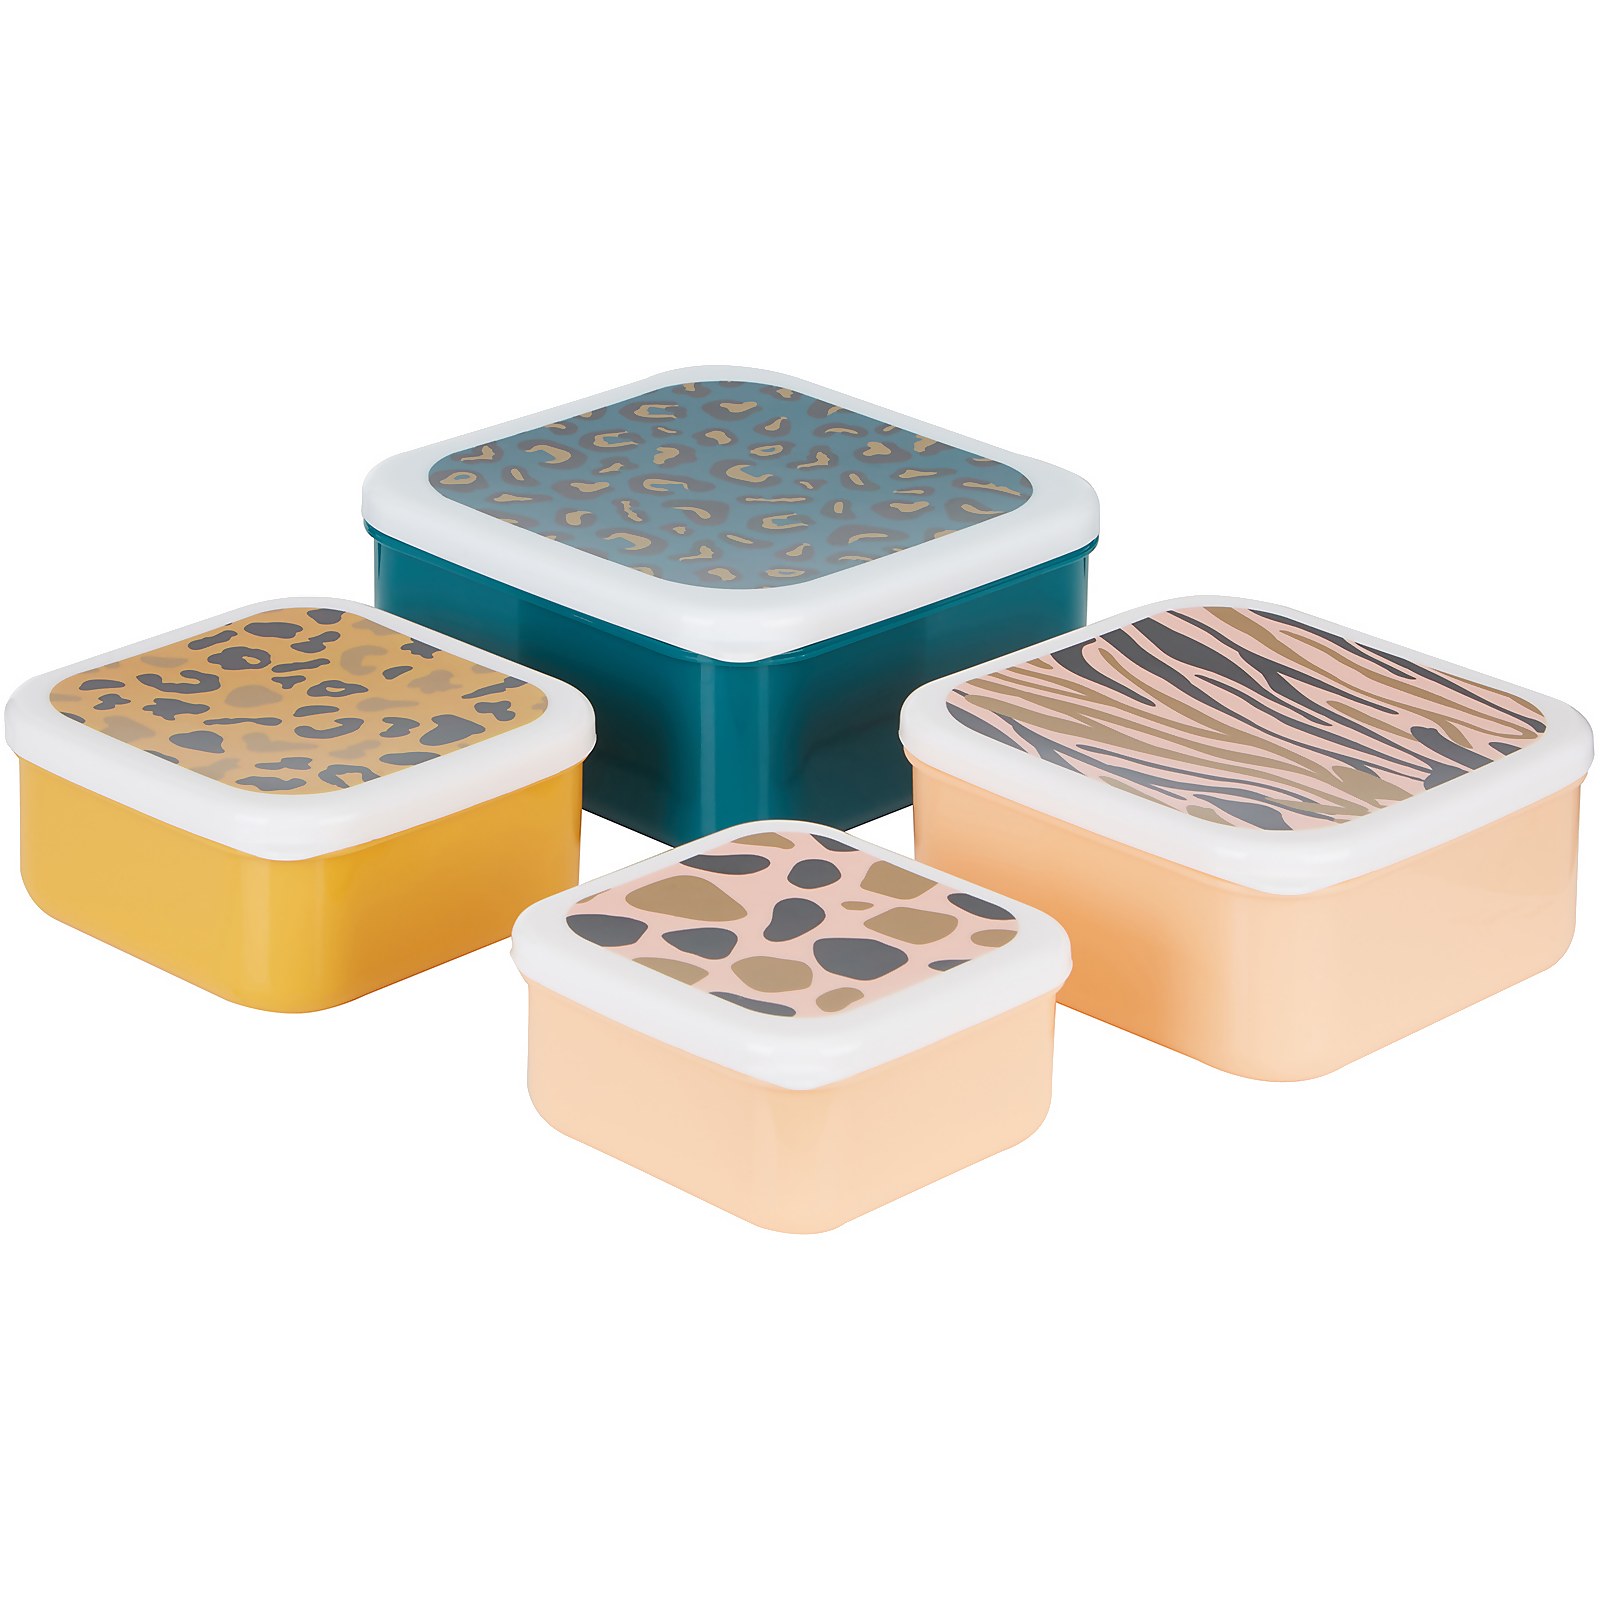 Image of Mimo Animal Print Lunch Box Set - Stackable